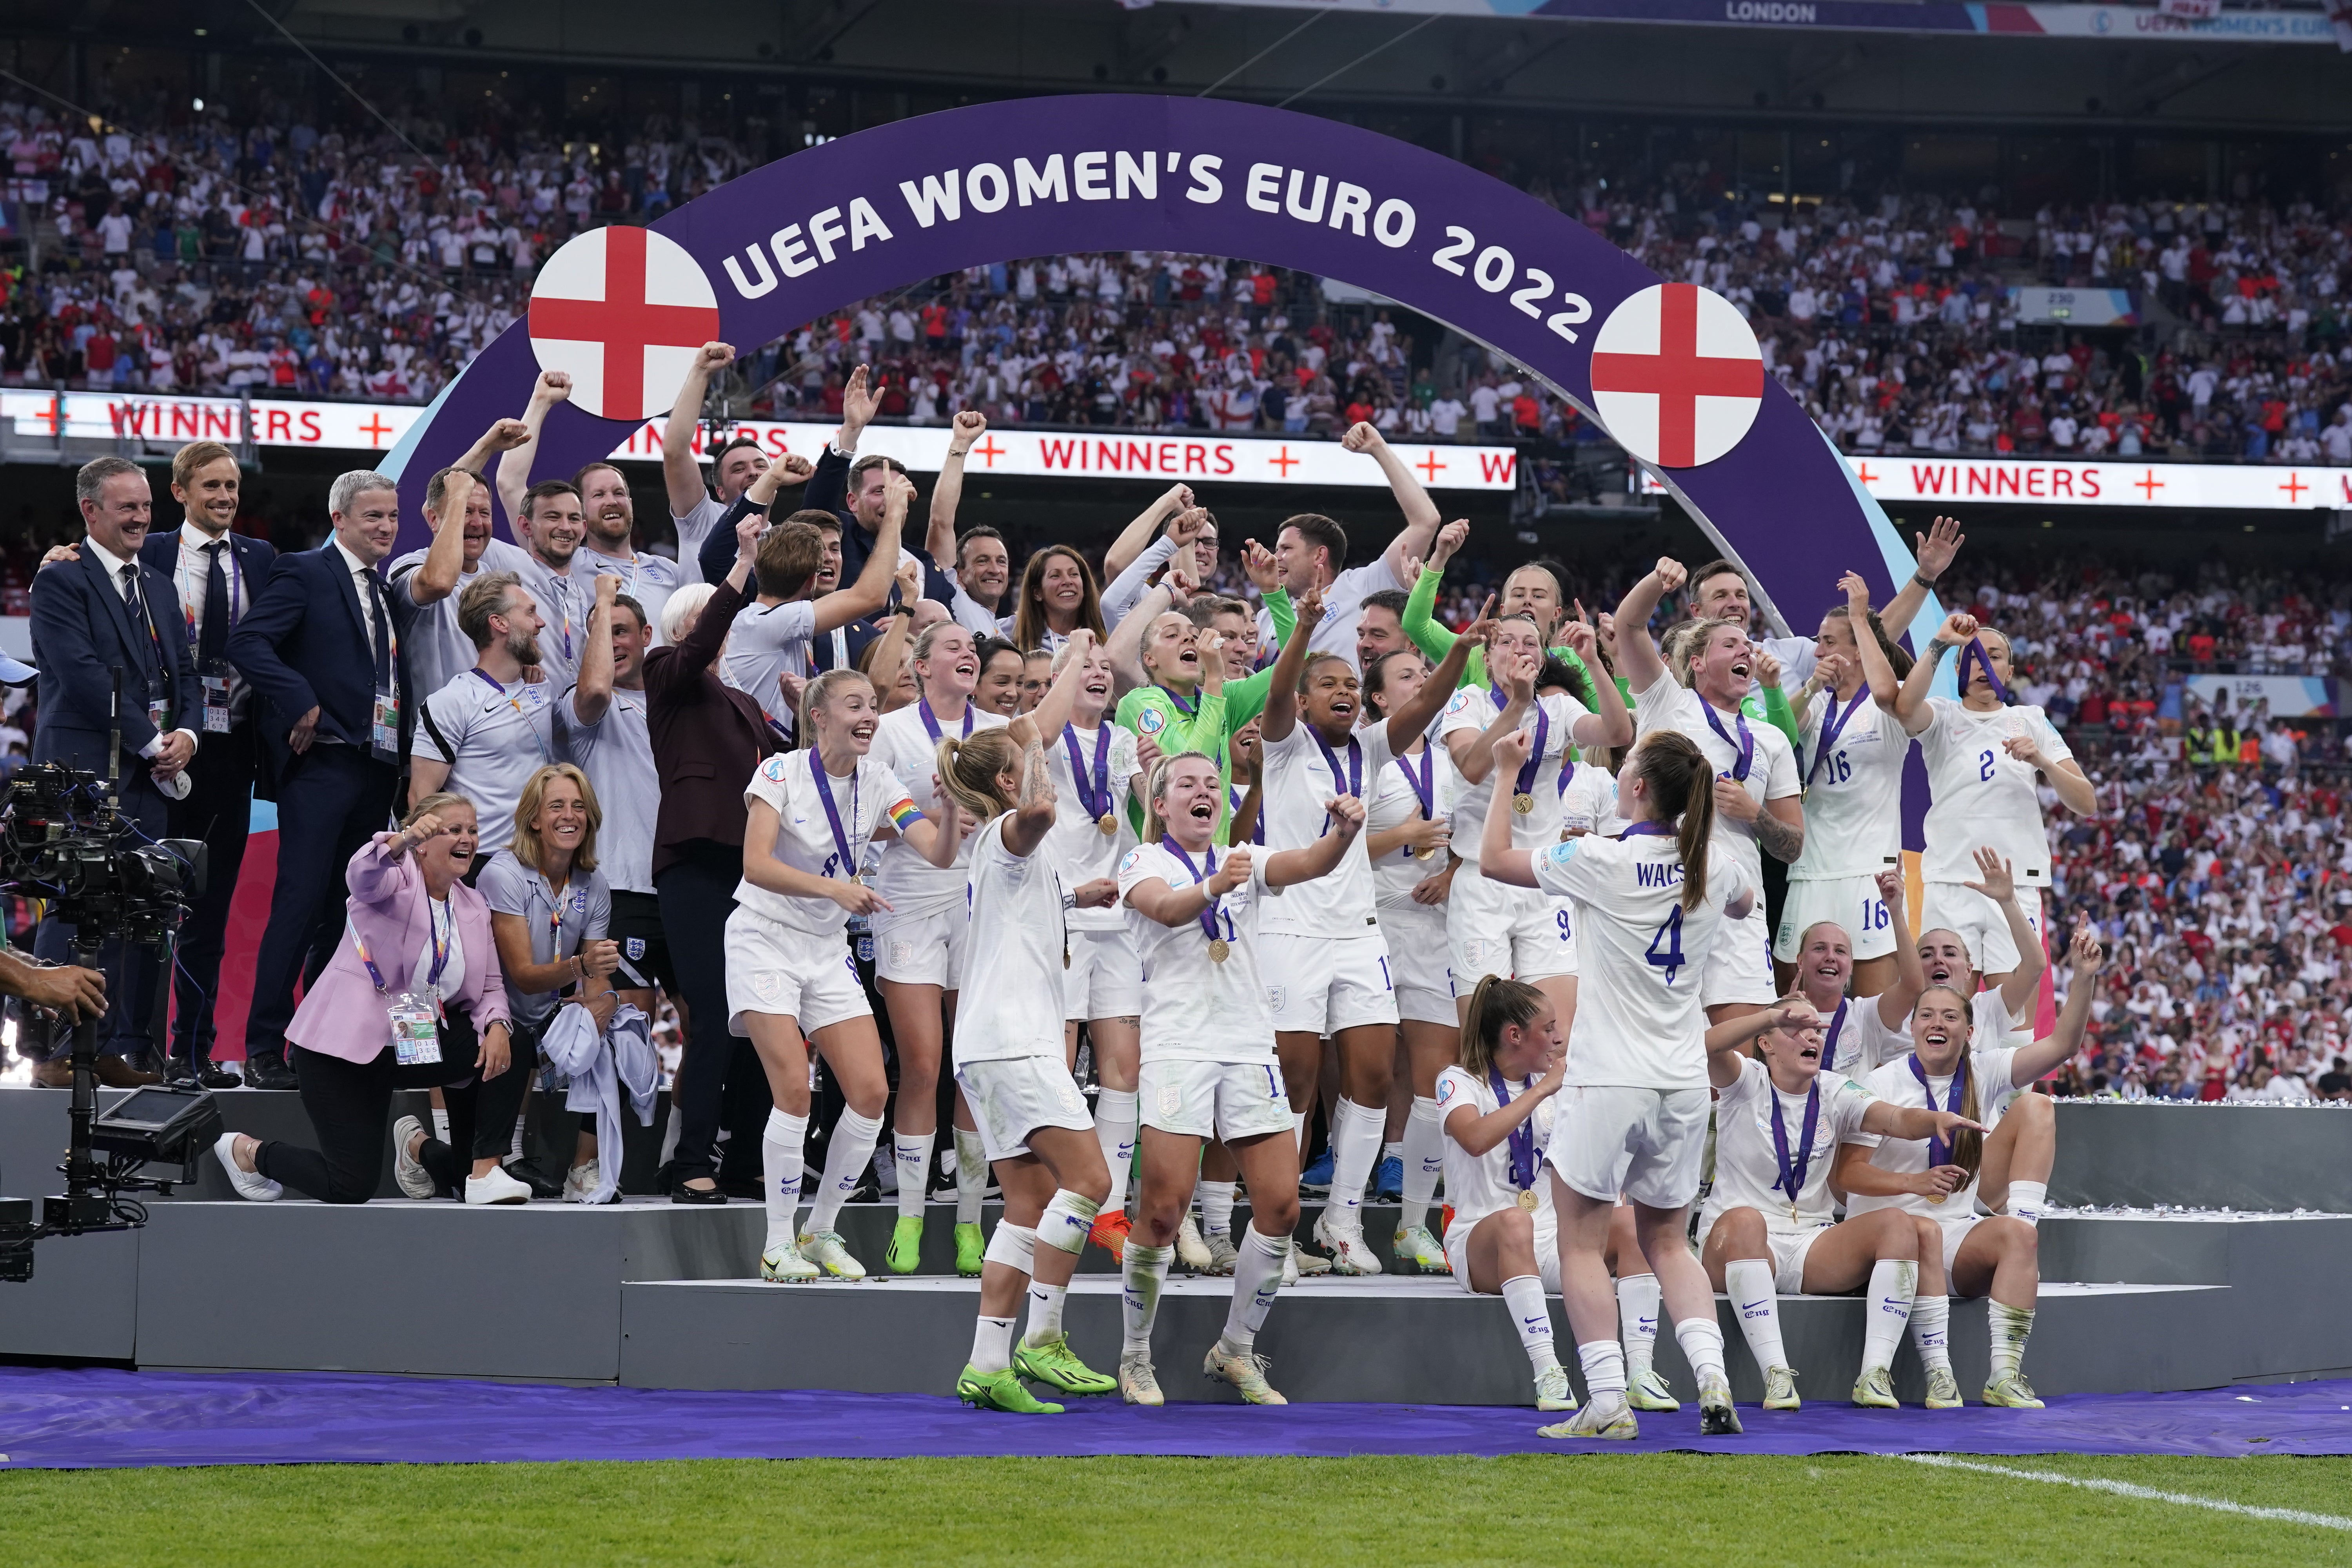 England players celebrate with the trophy following victory over Germany in the UEFA Women’s Euro 2022 final at Wembley (Danny Lawson/PA)